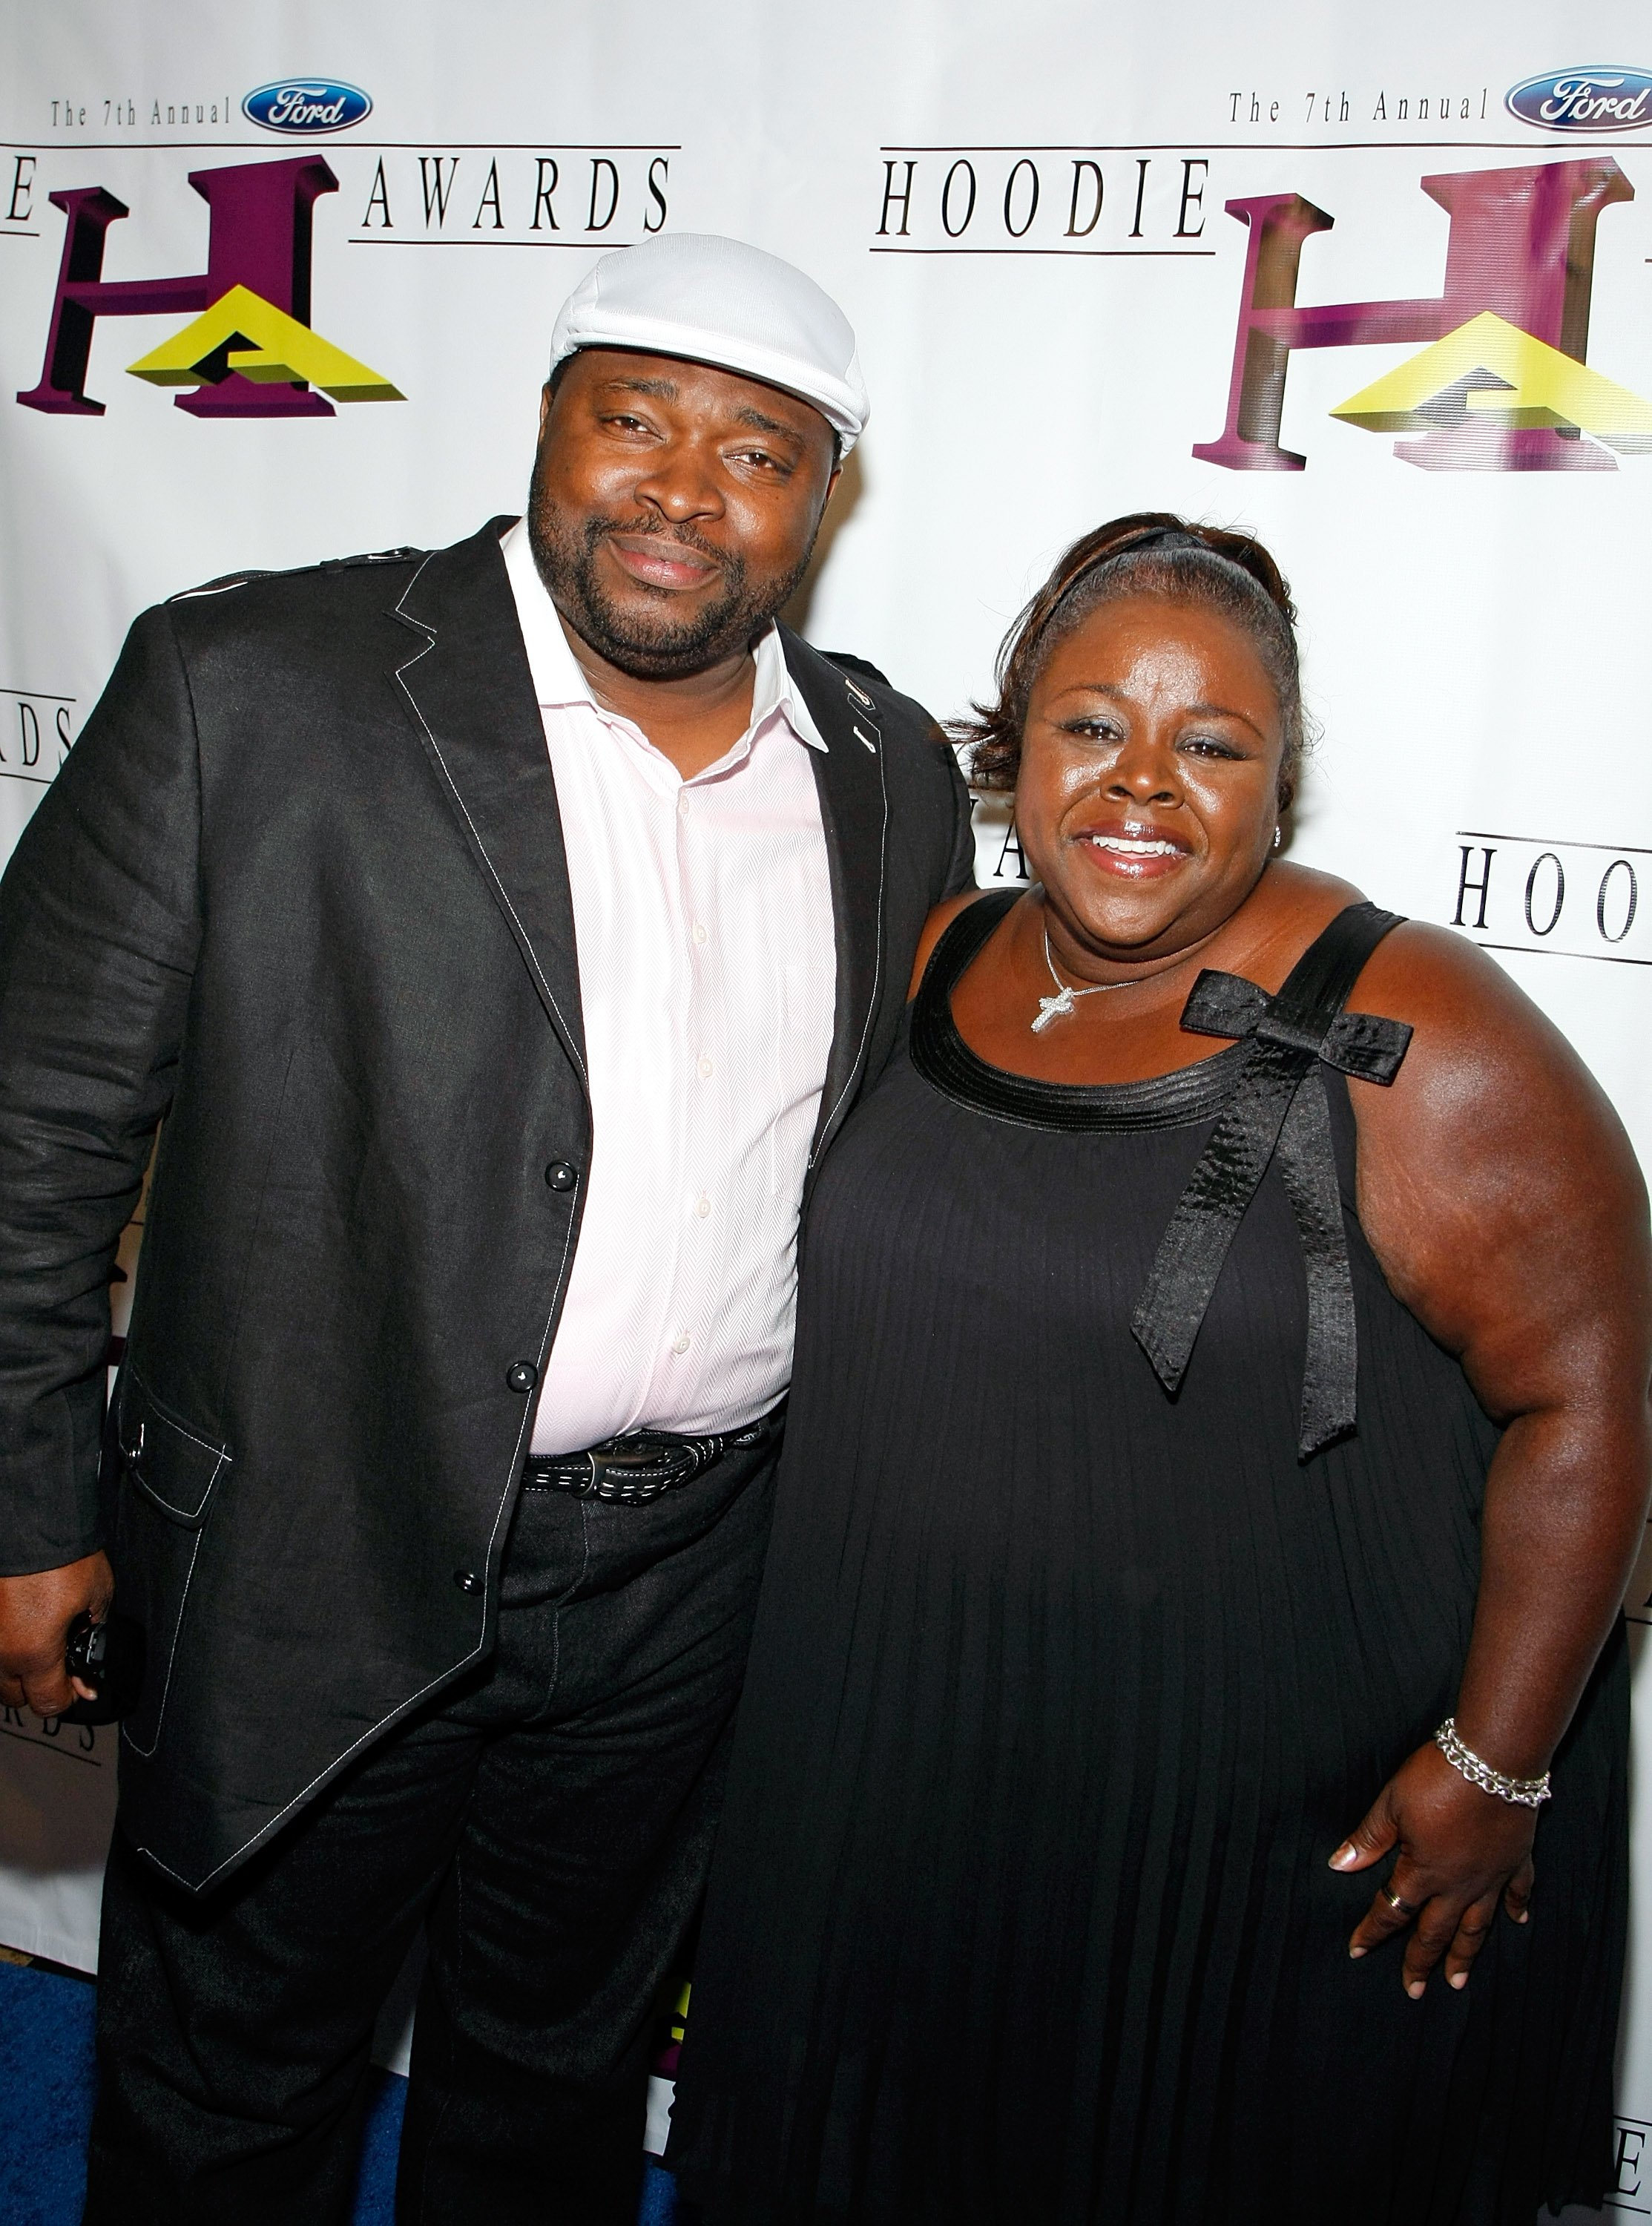  LaVan Davis and Cassi Davis at the 7th annual Hoodie Awards on August 15, 2009 in Las Vegas, Nevada | Photo: Getty Images